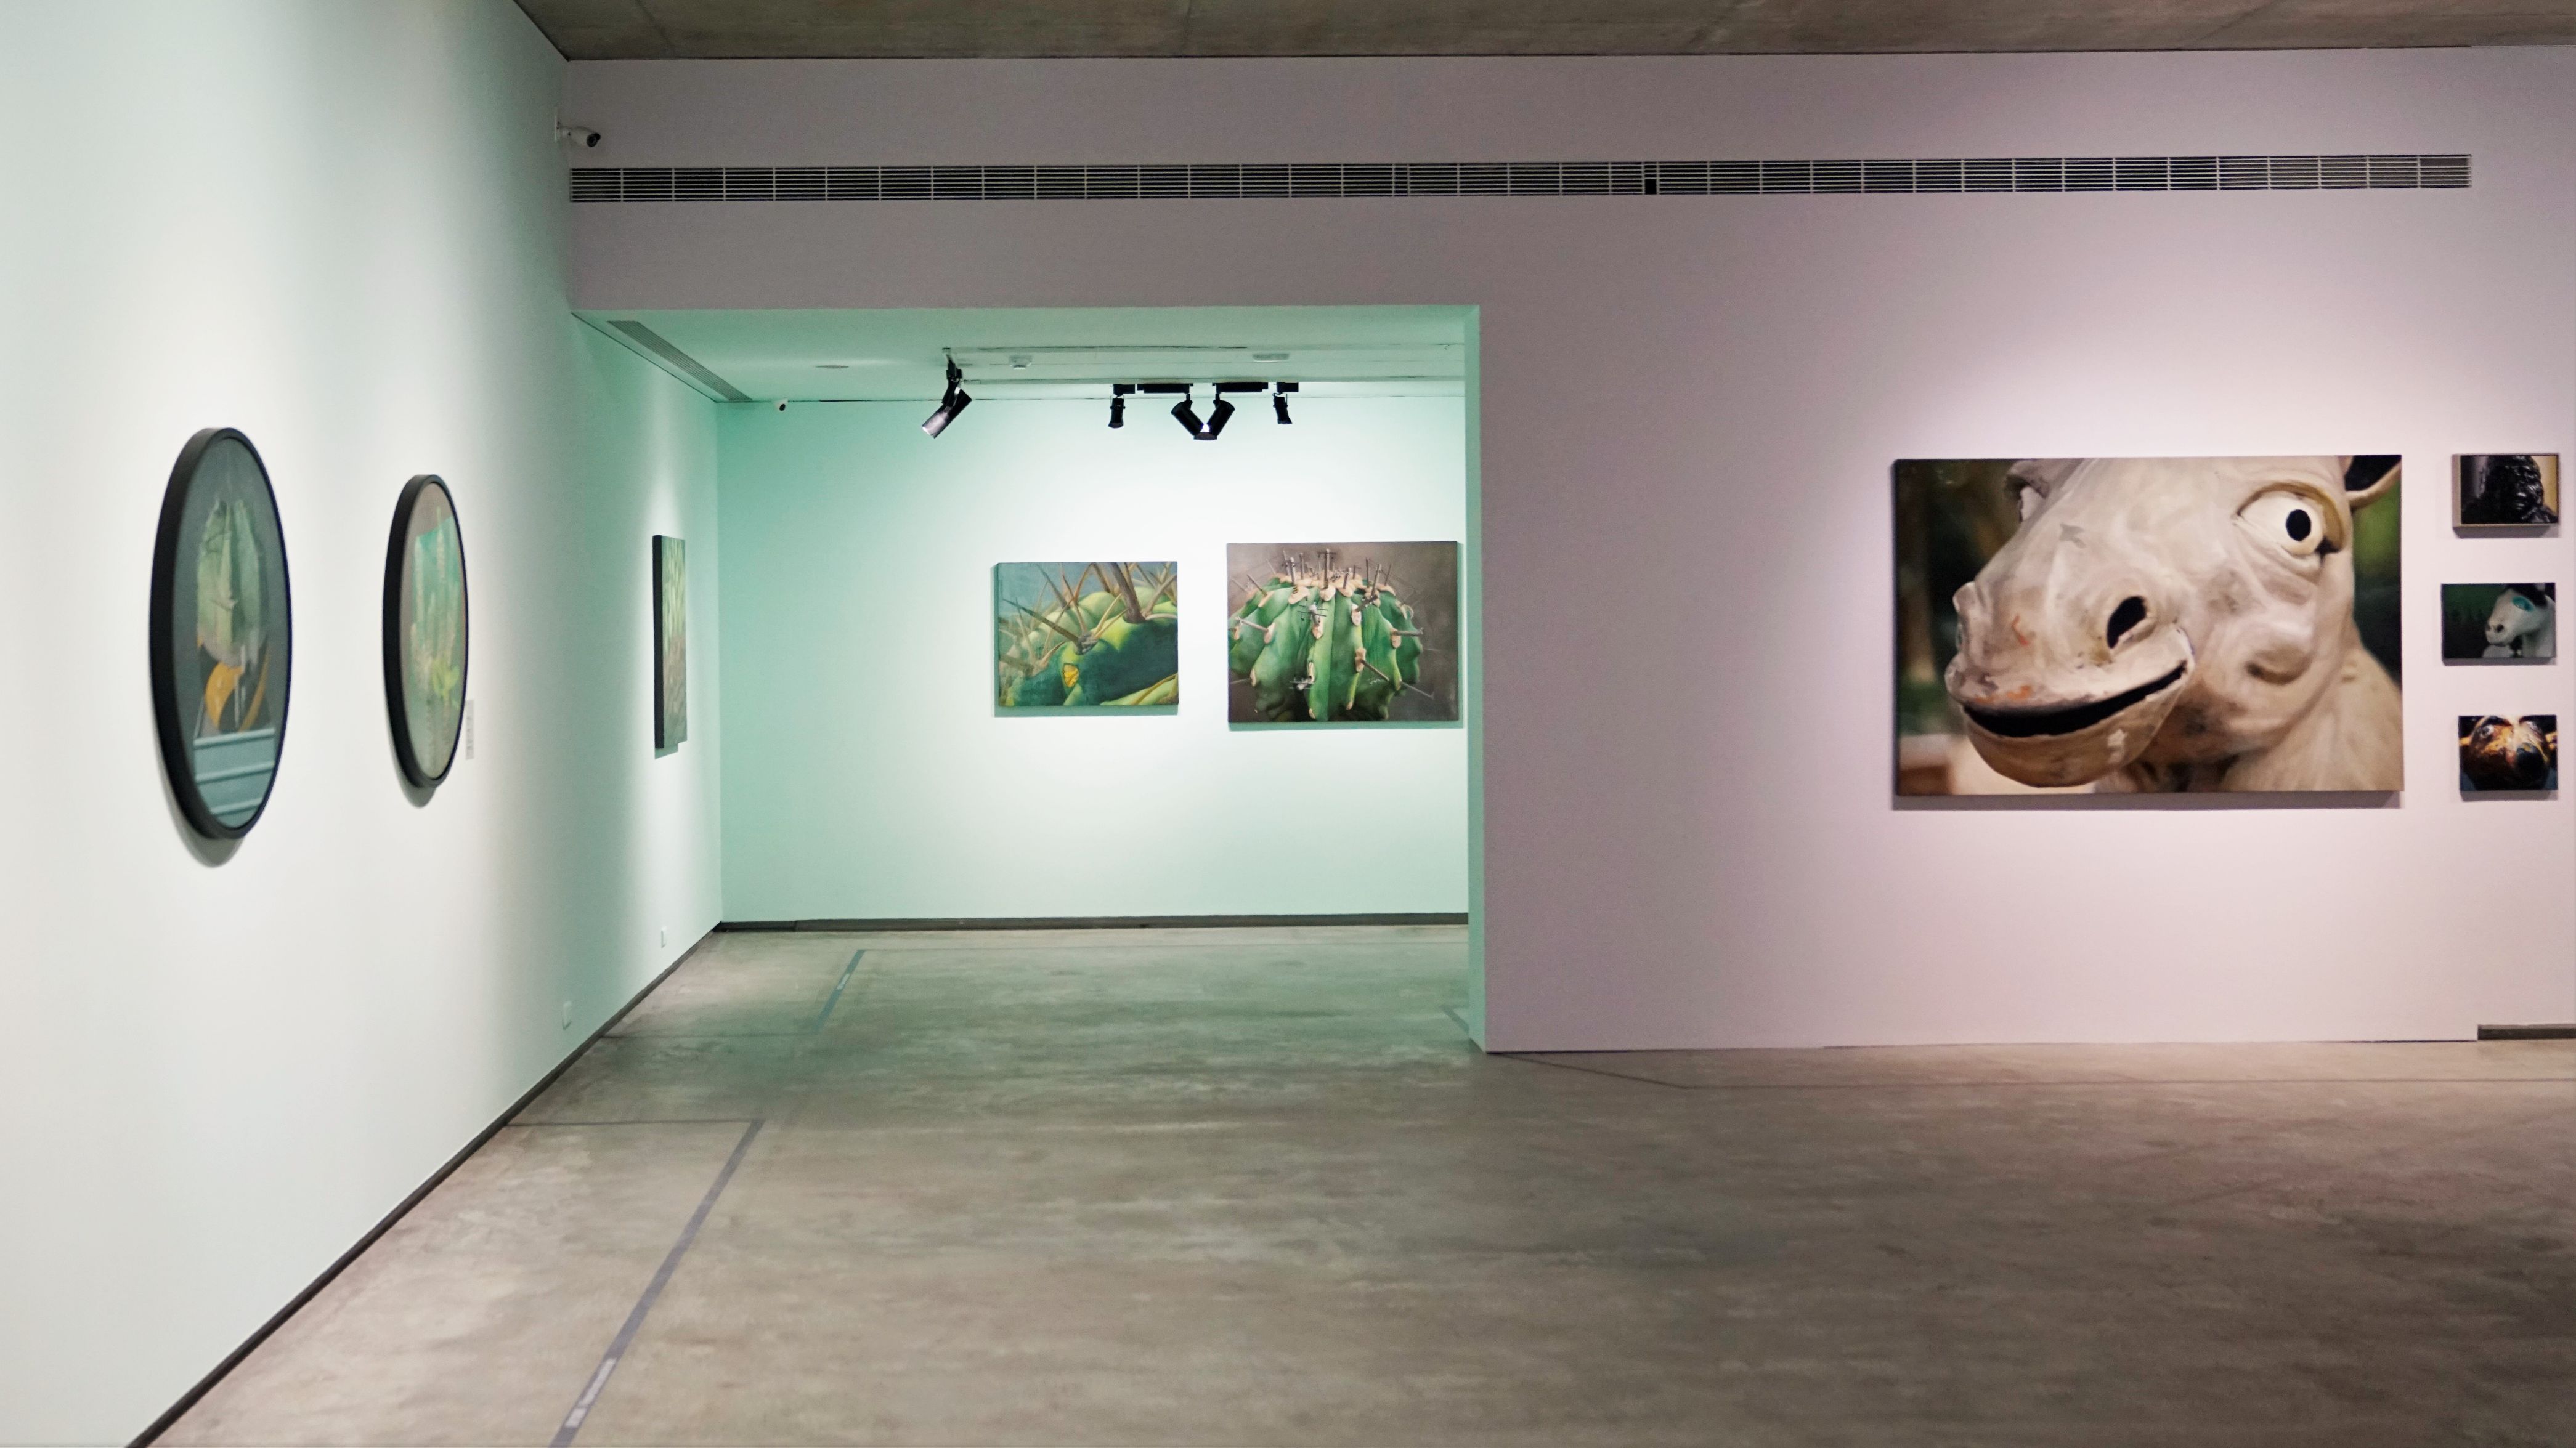 Installation view of 2nd floor gallery